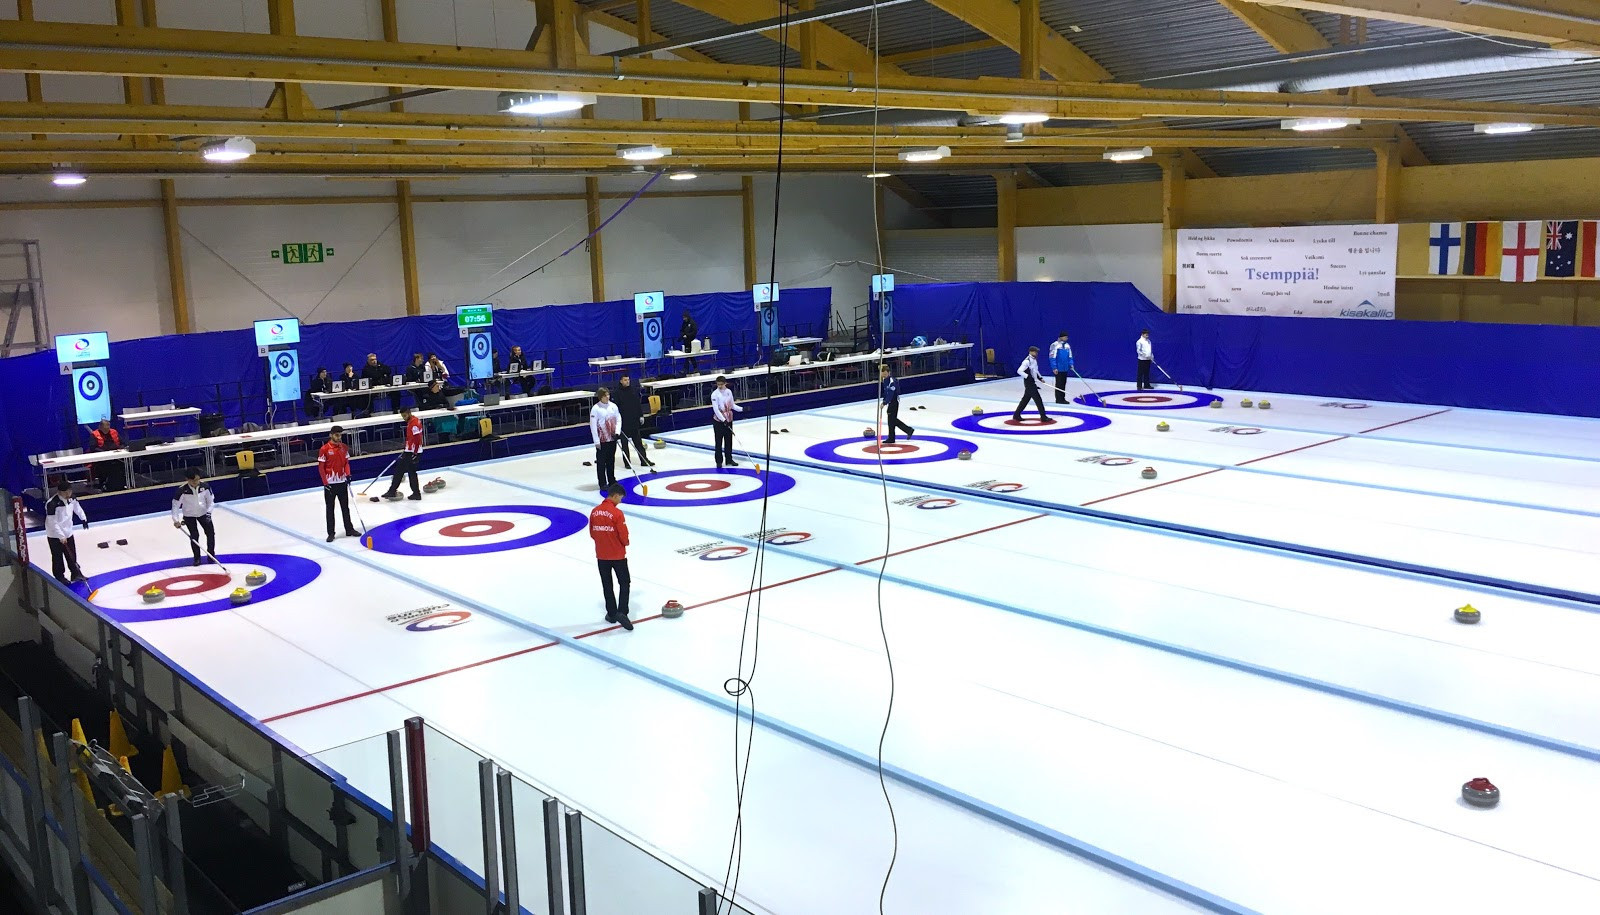 Sixteen teams will compete at the World Curling Federation qualification event in Finland ©Kisakallio Sports Institute